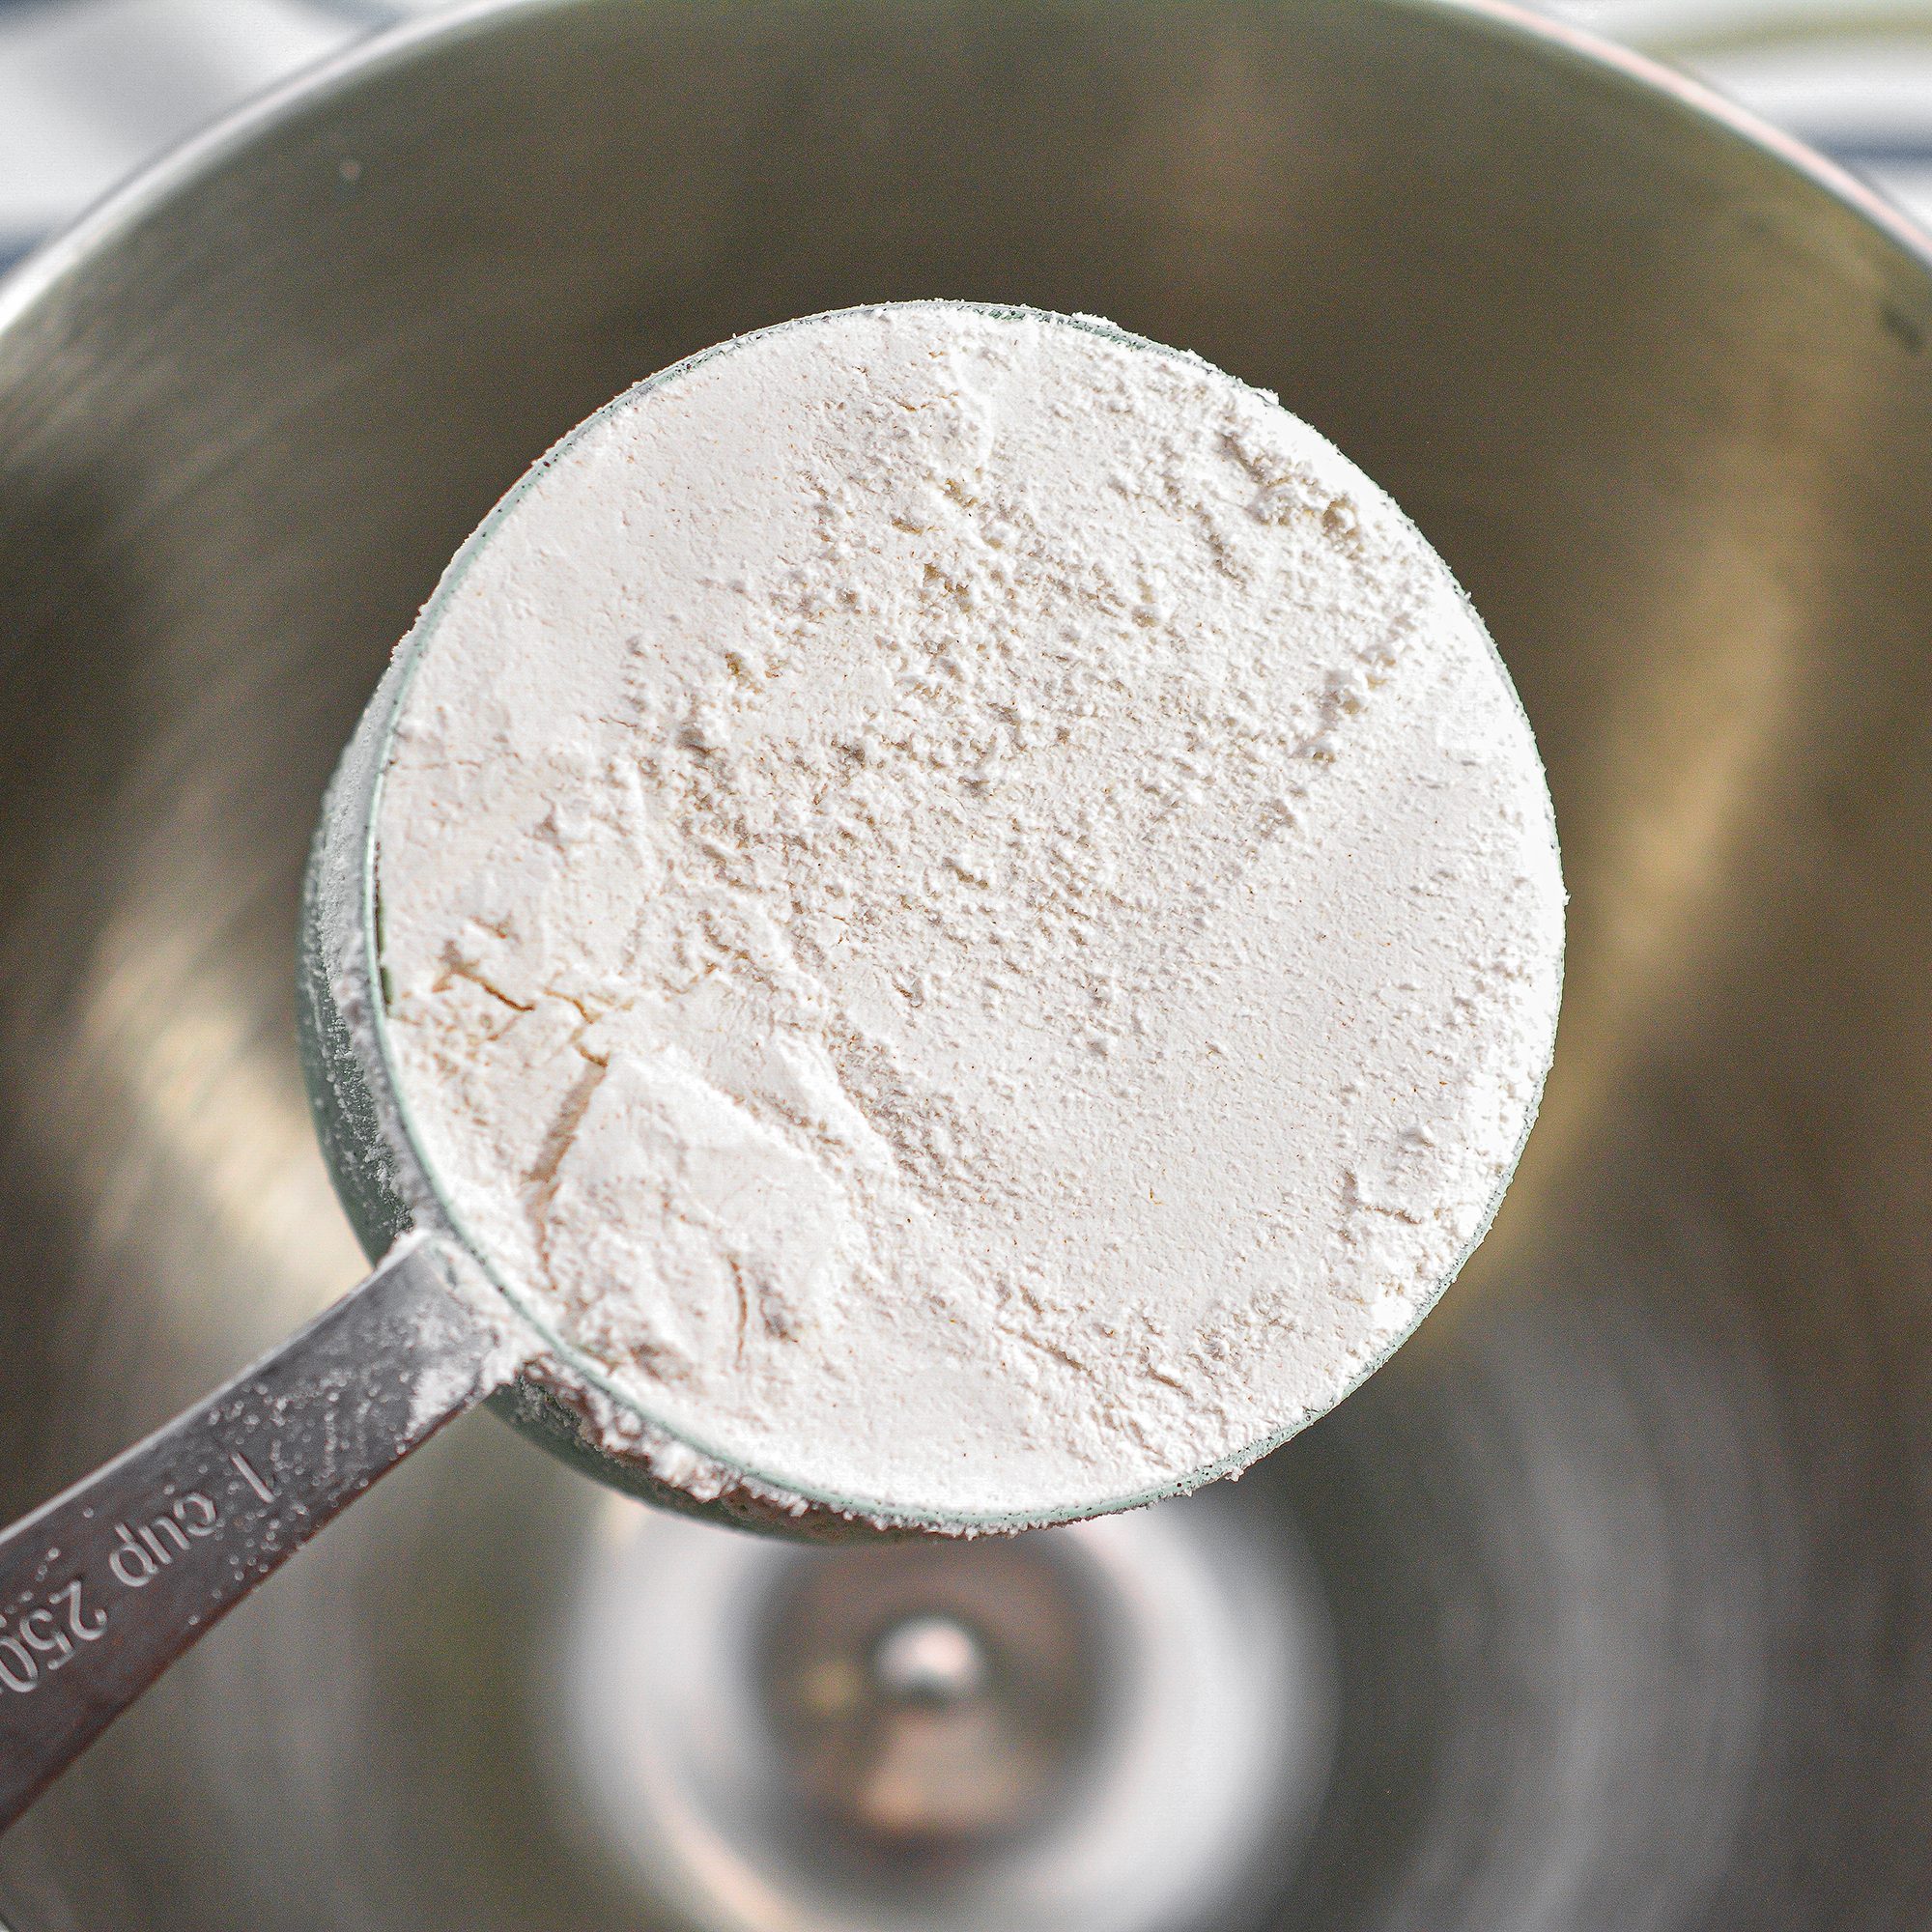 In a mixing bowl, add the flour